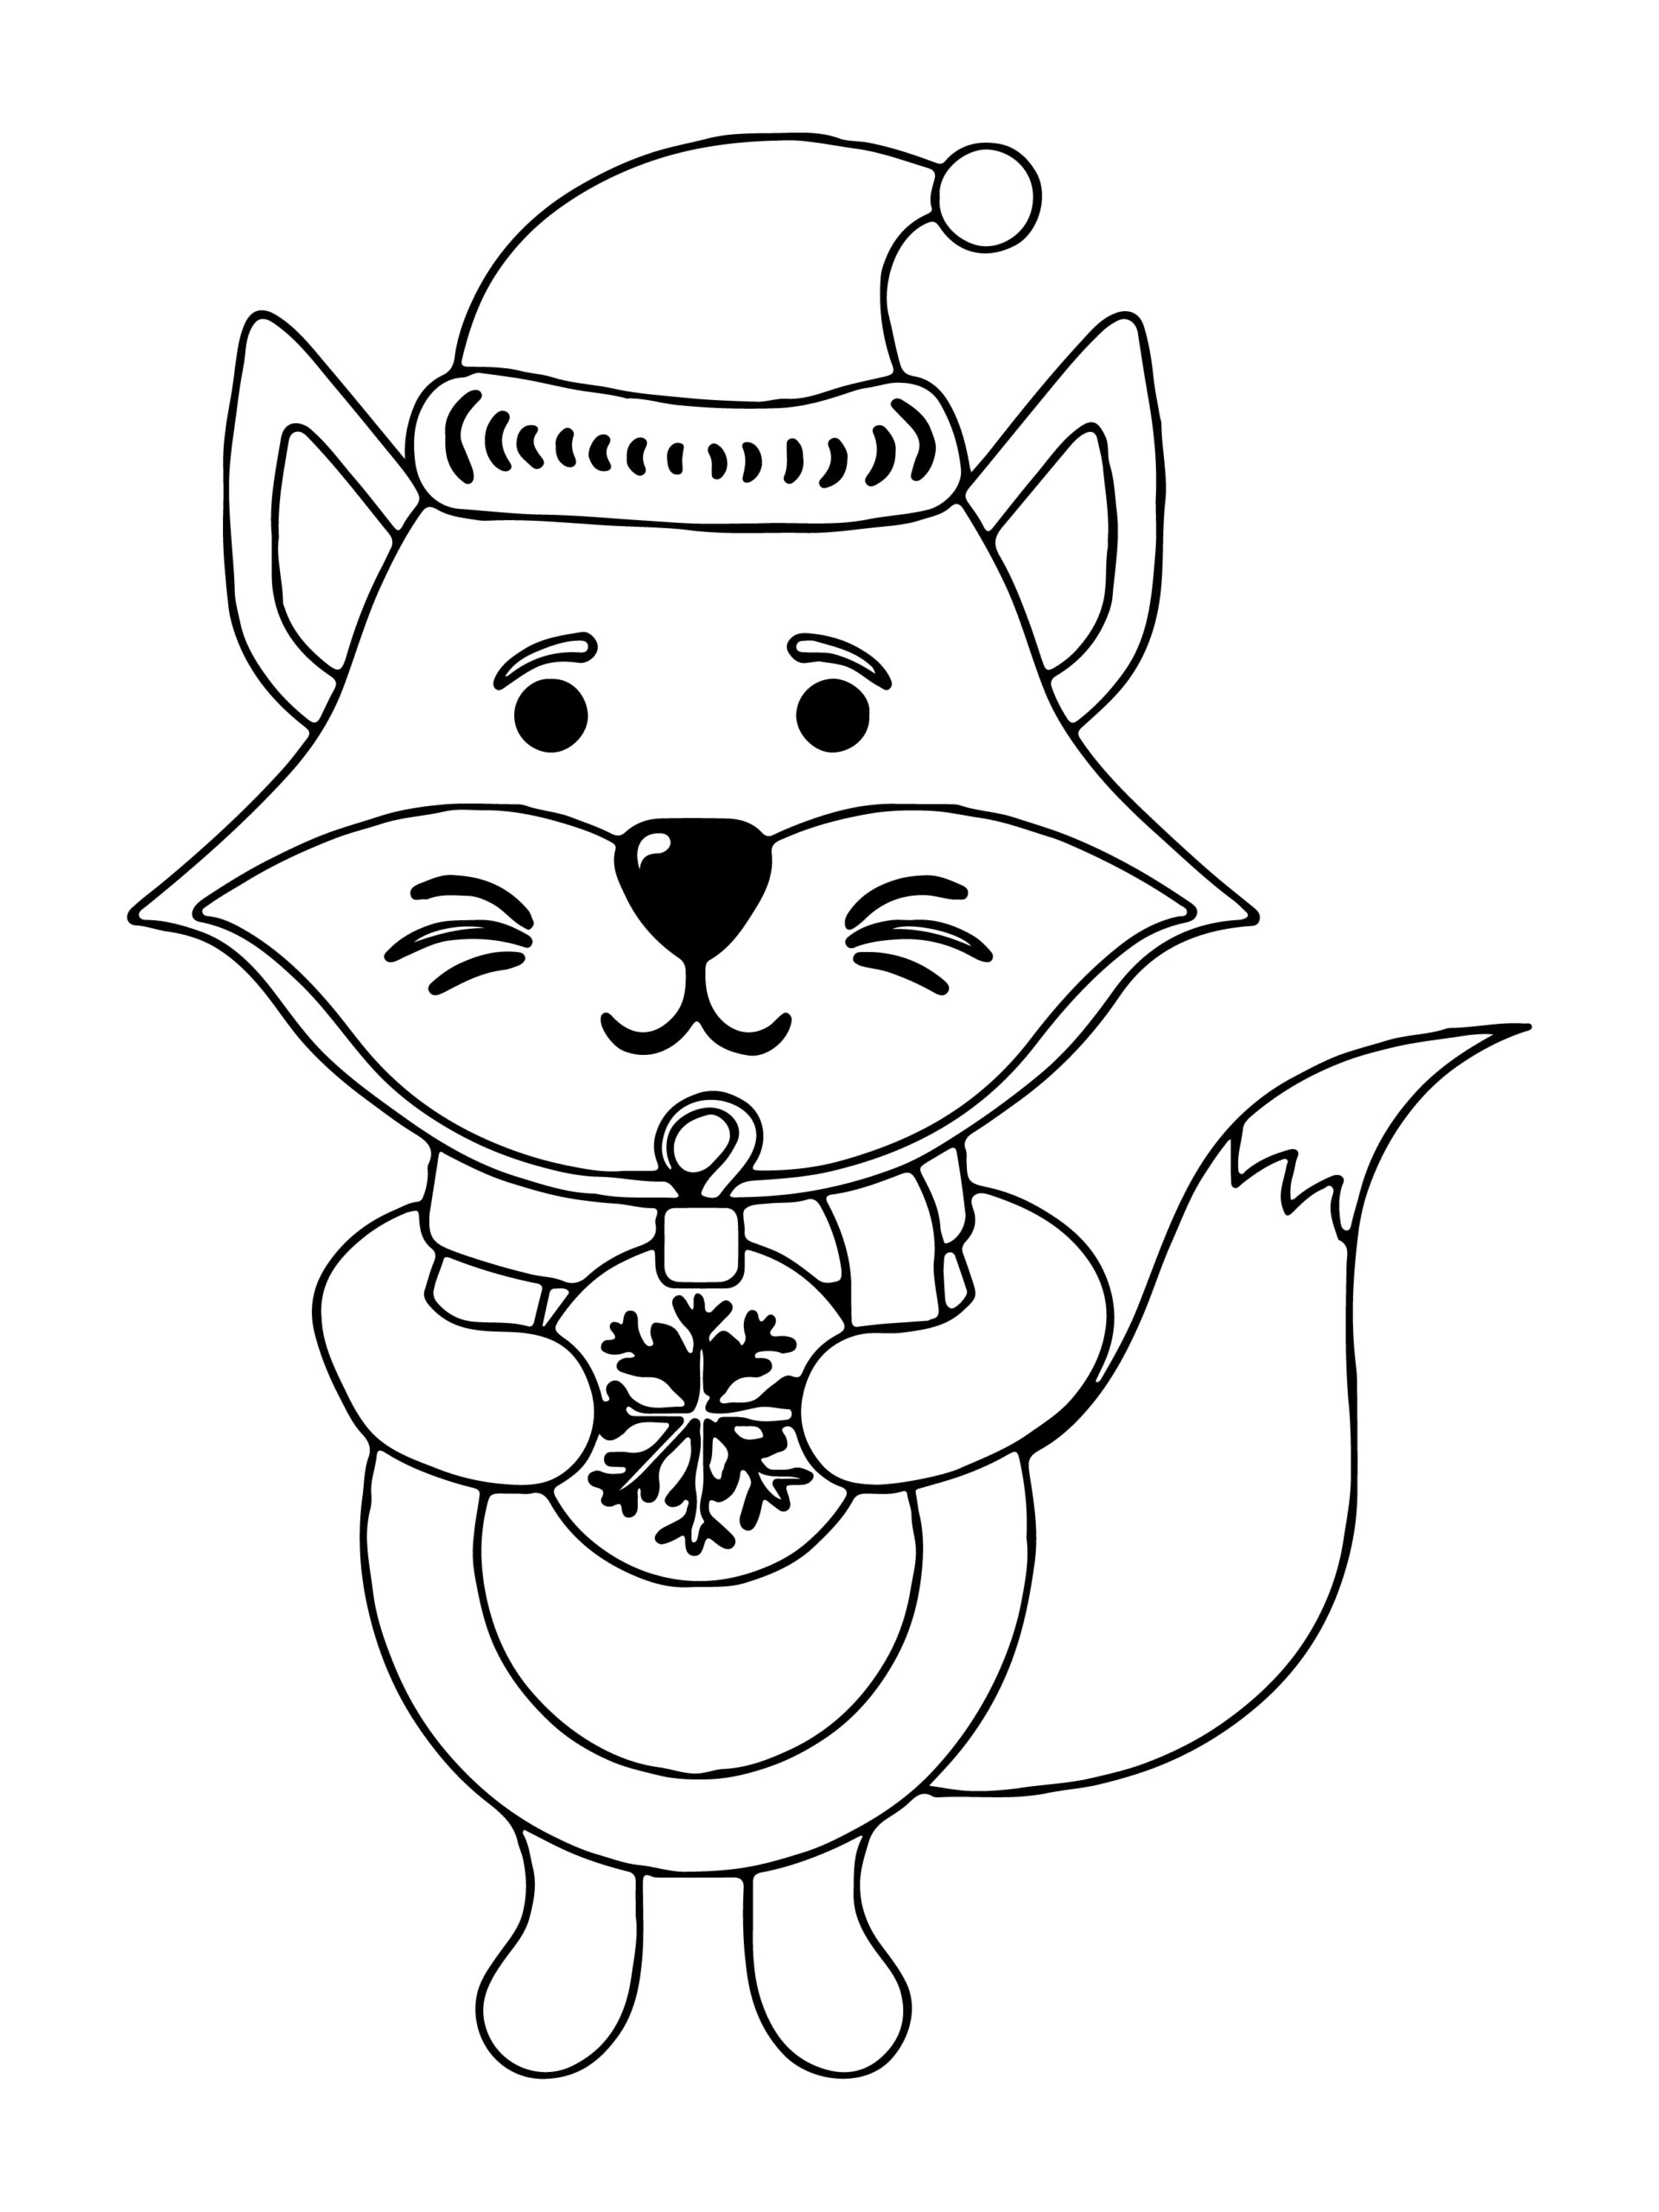 halcyon Christmas Coloring Page - Free Printable Coloring Pages for Kids